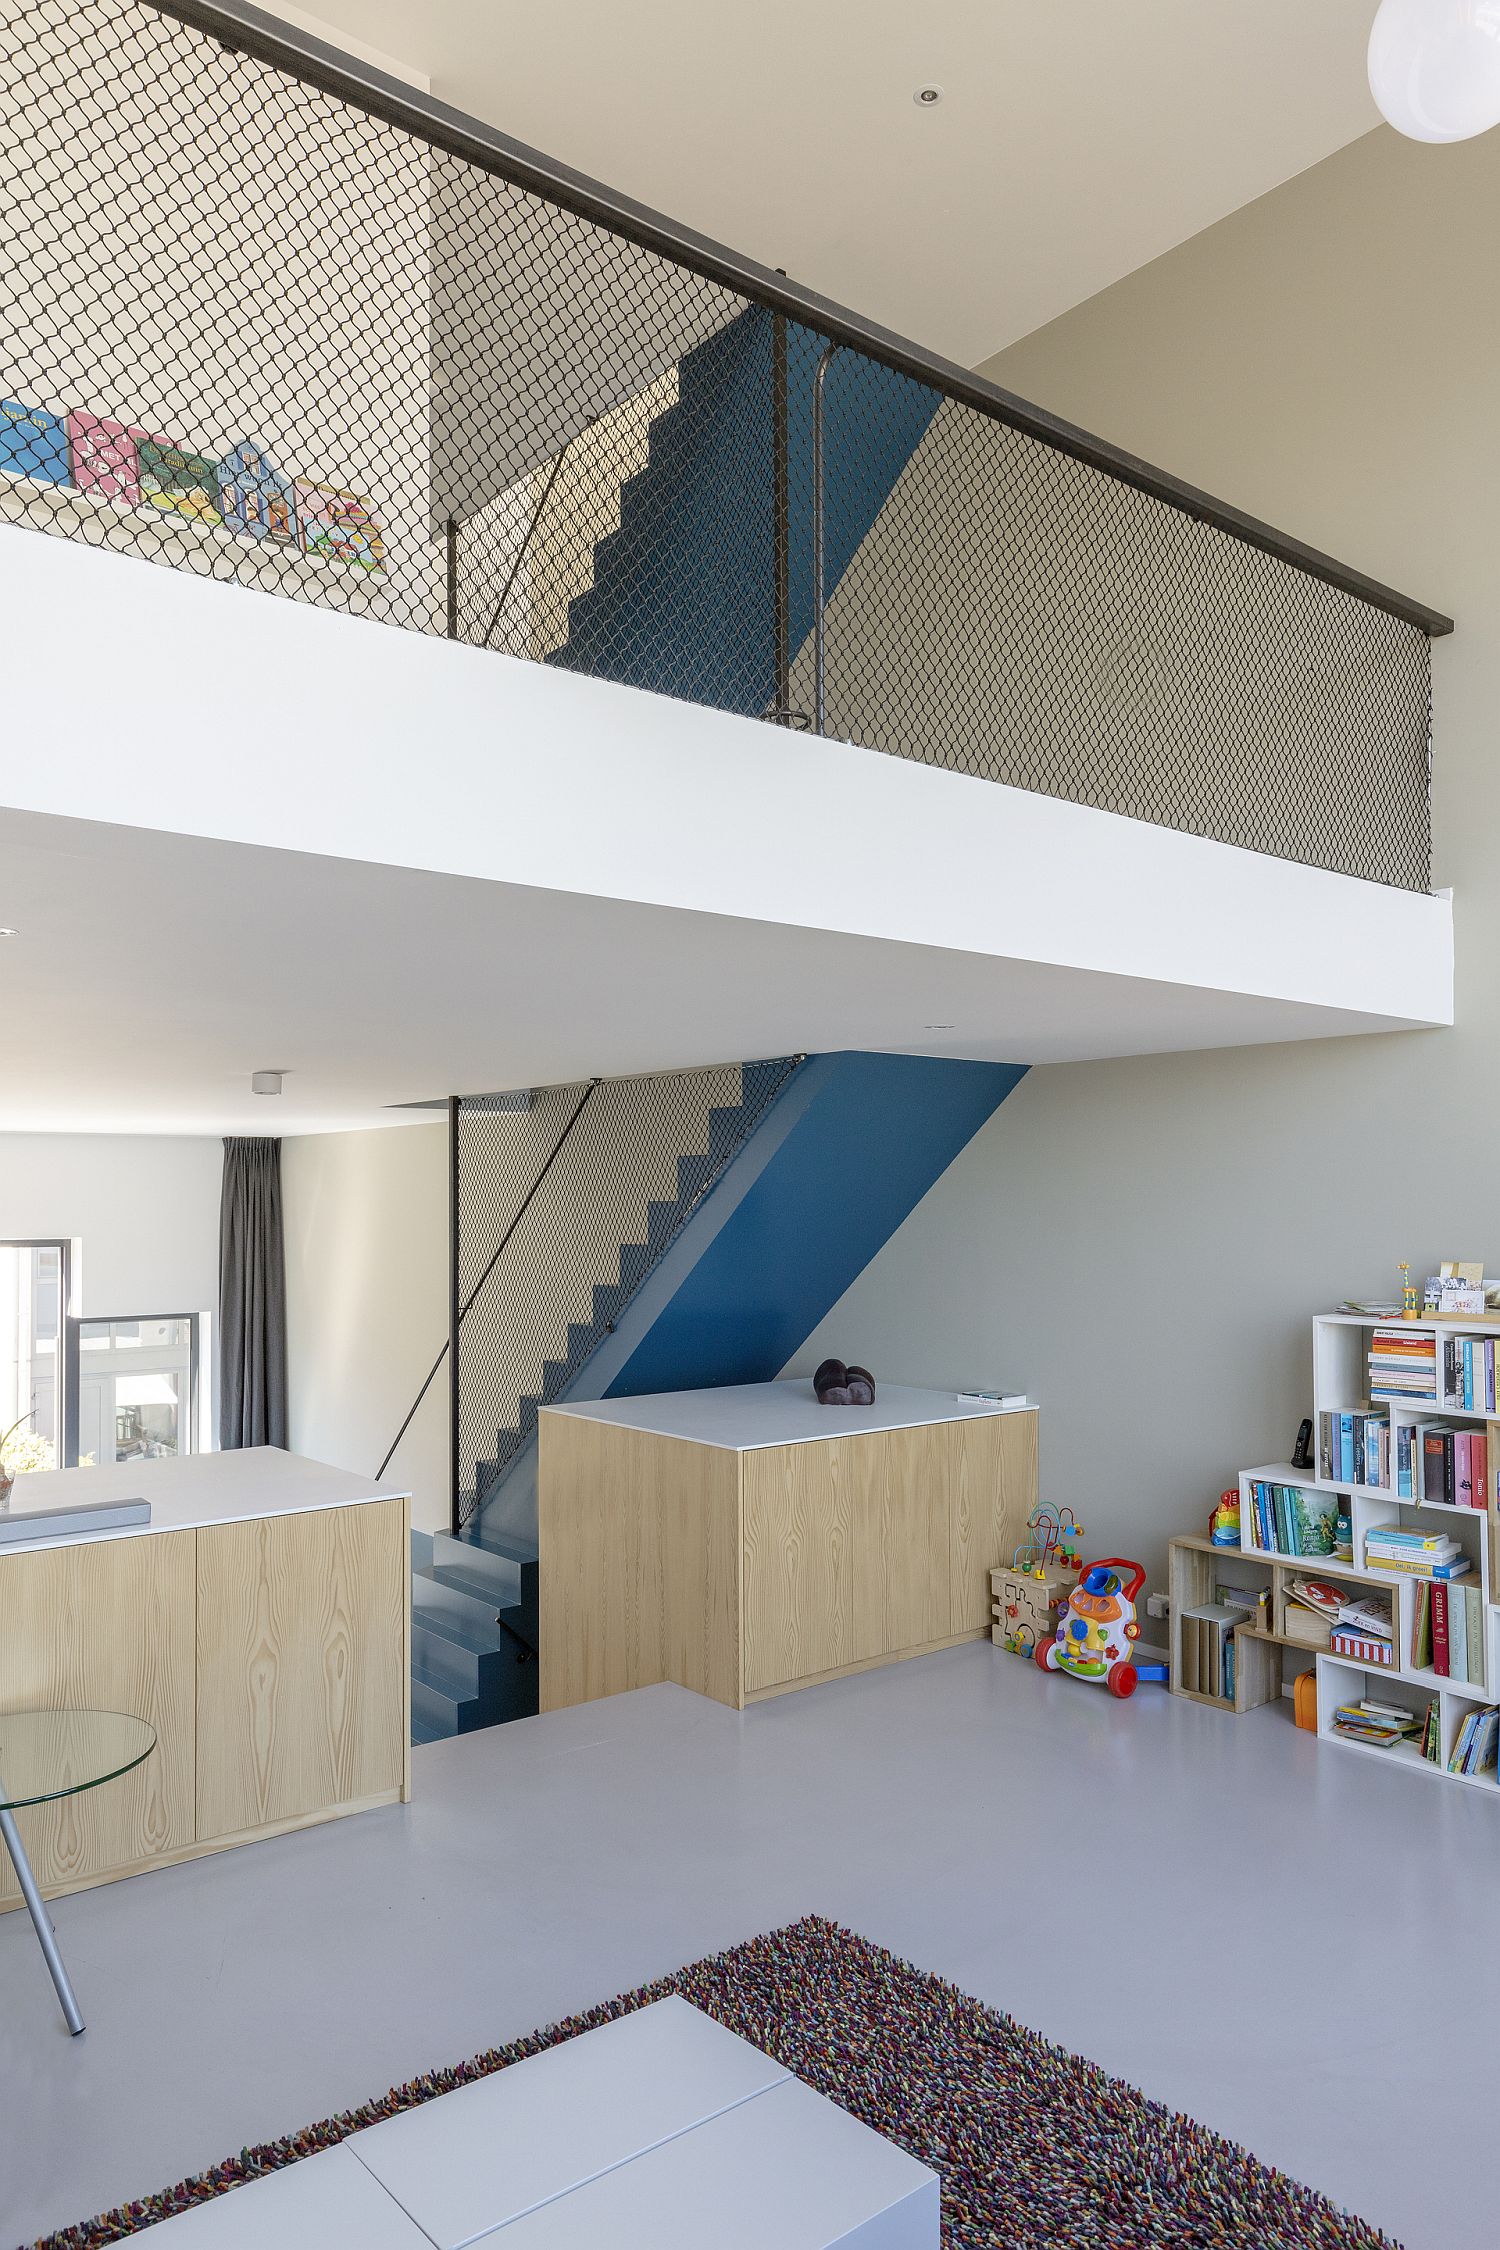 Multi-level-interior-of-the-blue-house-feels-impersonal-at-best